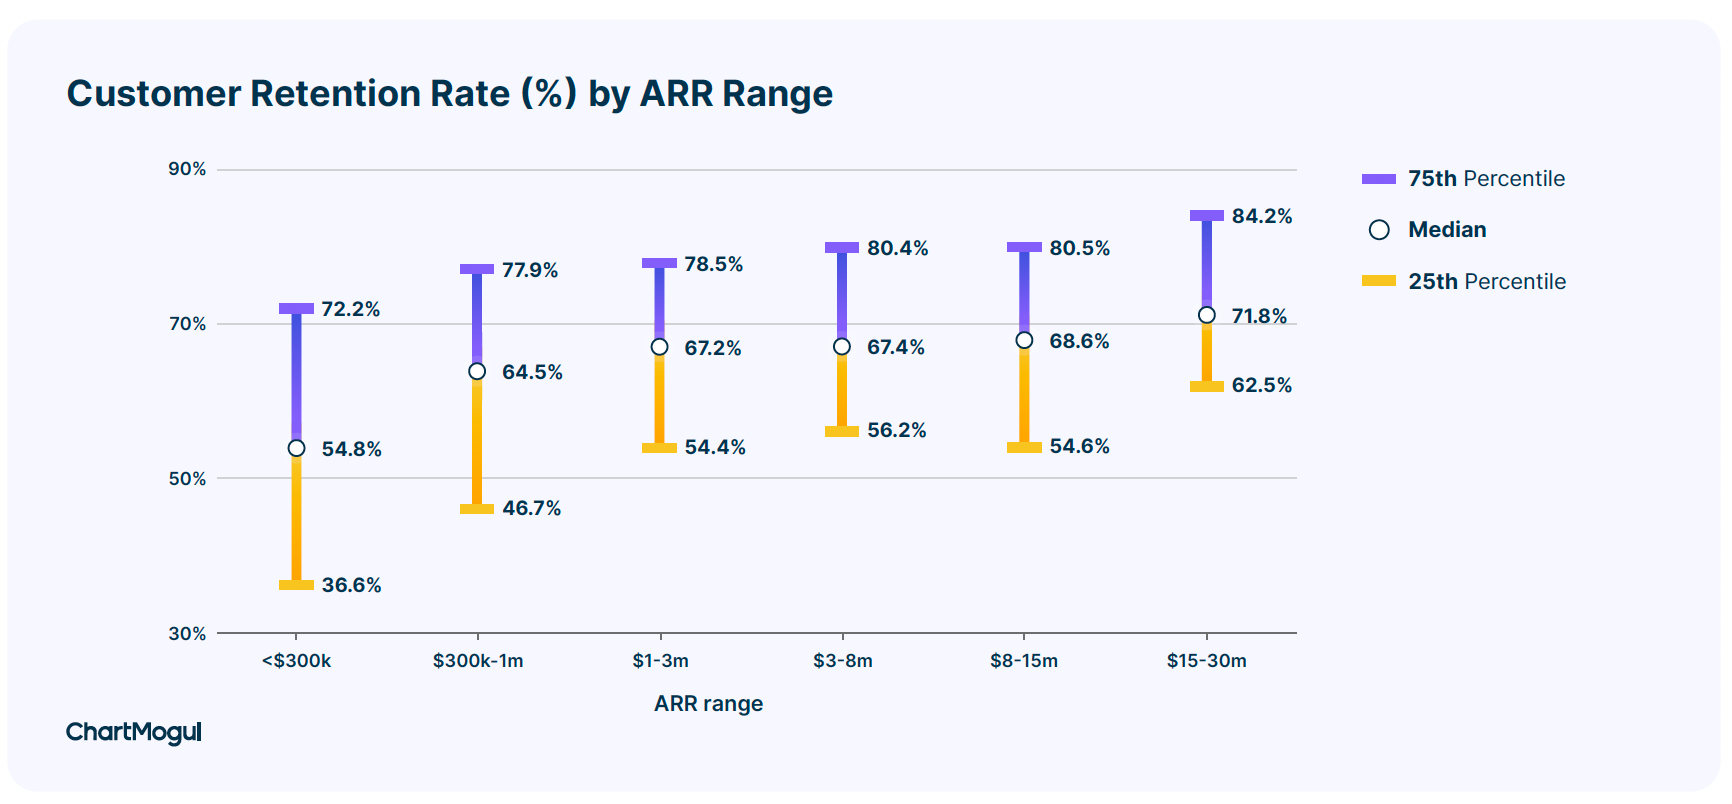 Customer Retention Rate (%) by ARR Range